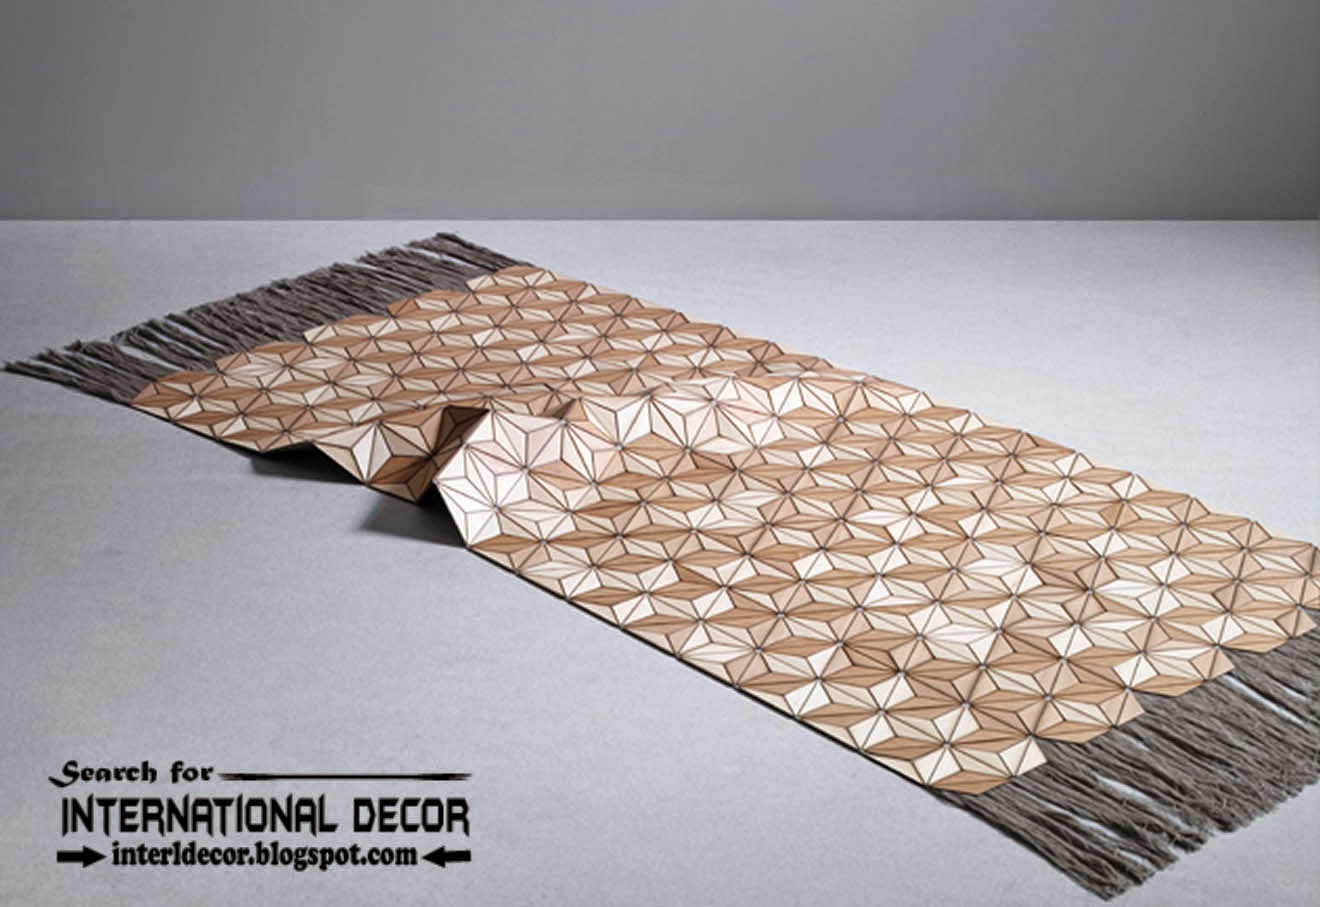 New collection of Eco-friendly wooden carpet and rugs textured